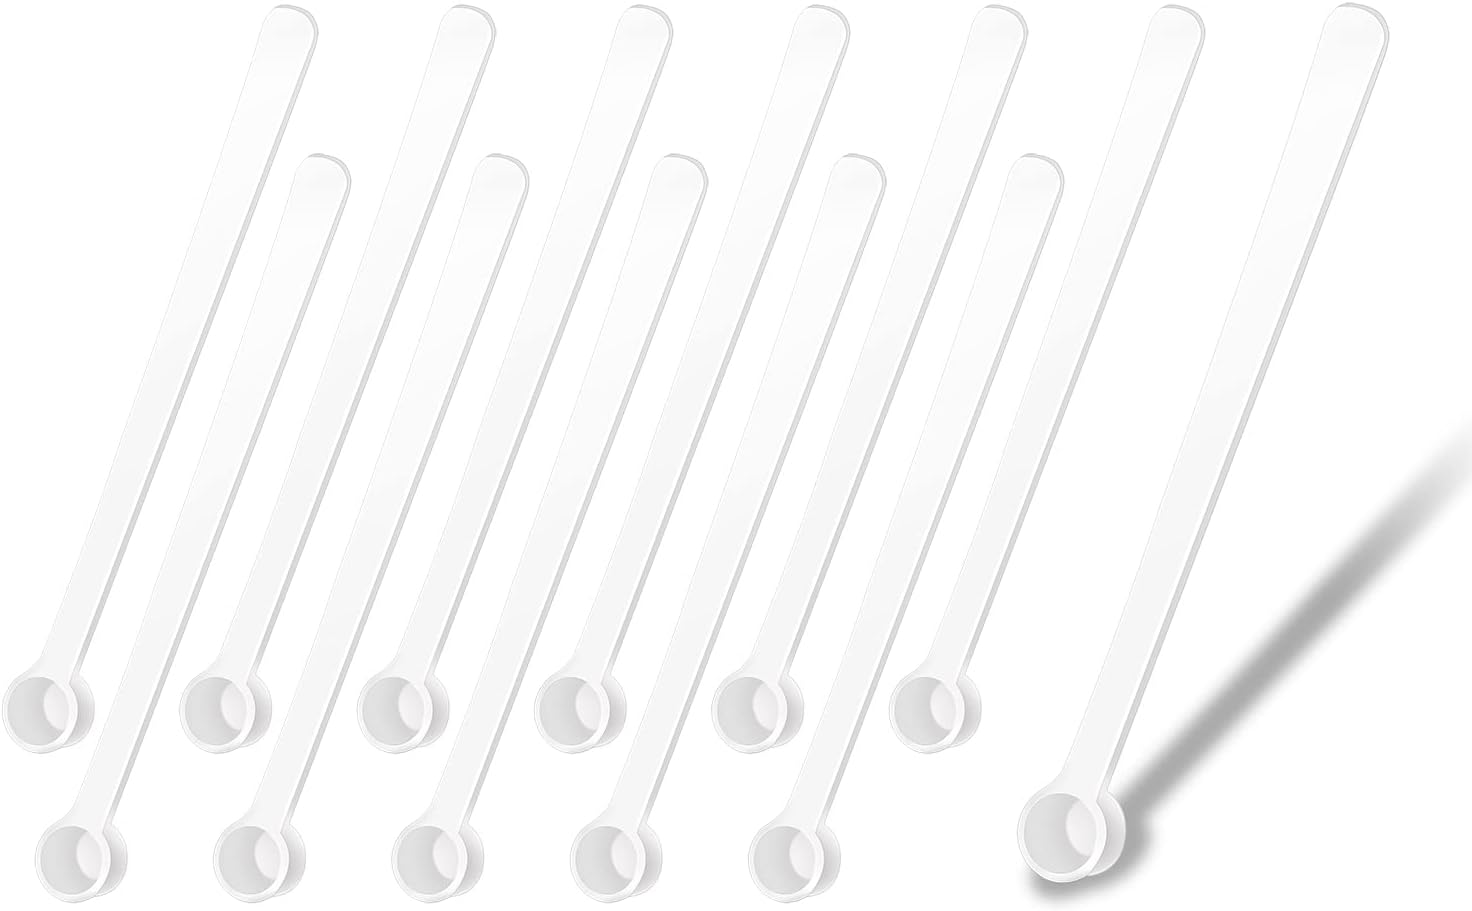 1 Gram Pack Of 30 White Measuring Micro Scoop 1g Pp Lab Measuring Mini  Spoons For Powder Measurement Or Baking - Static-free Plastic Tiny Scoops  For M